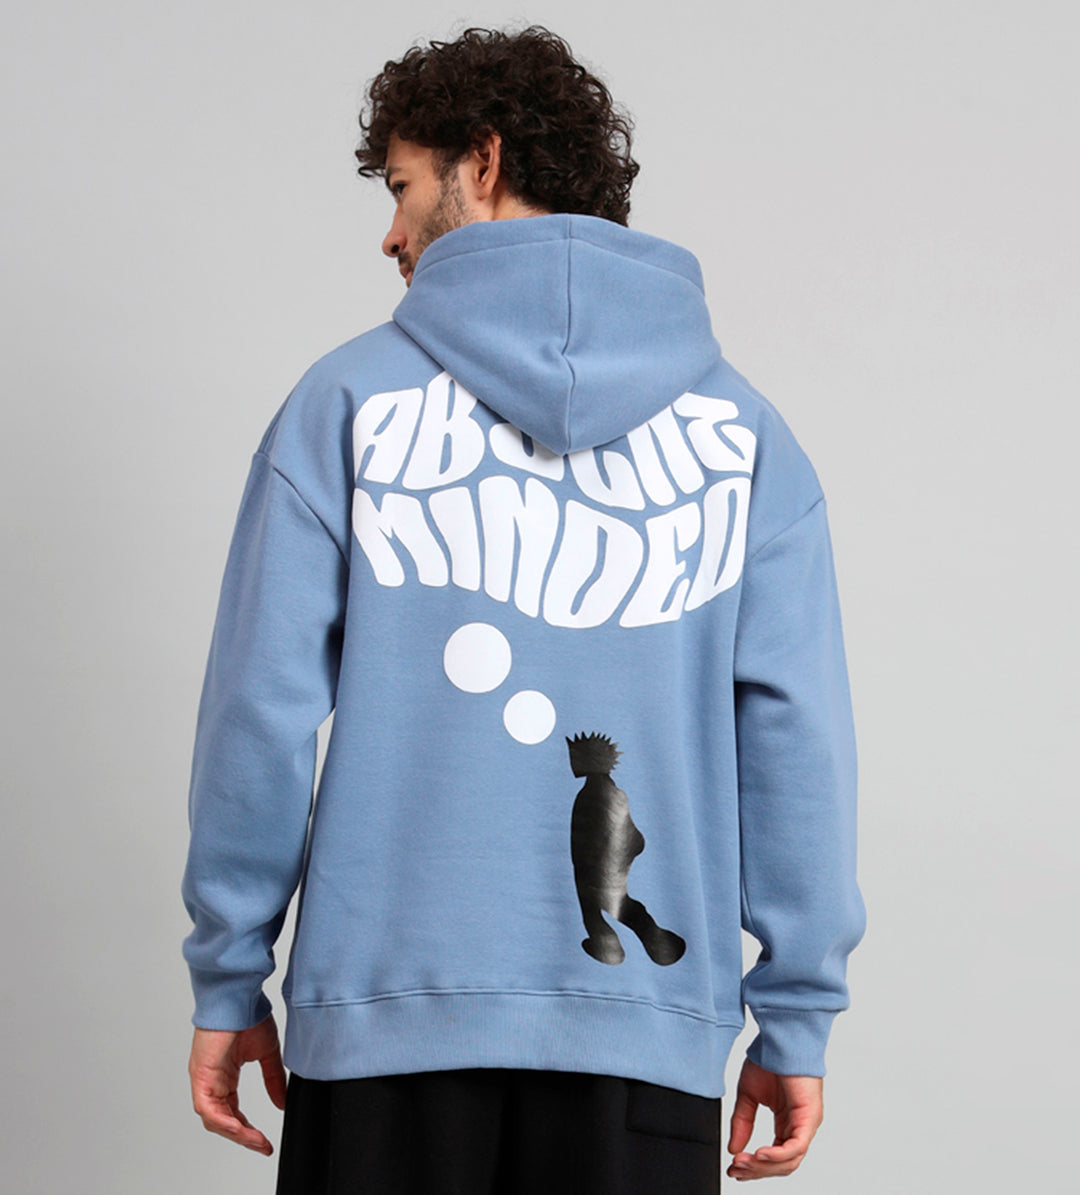 Absent Minded Print Oversized Hoodie - griffel